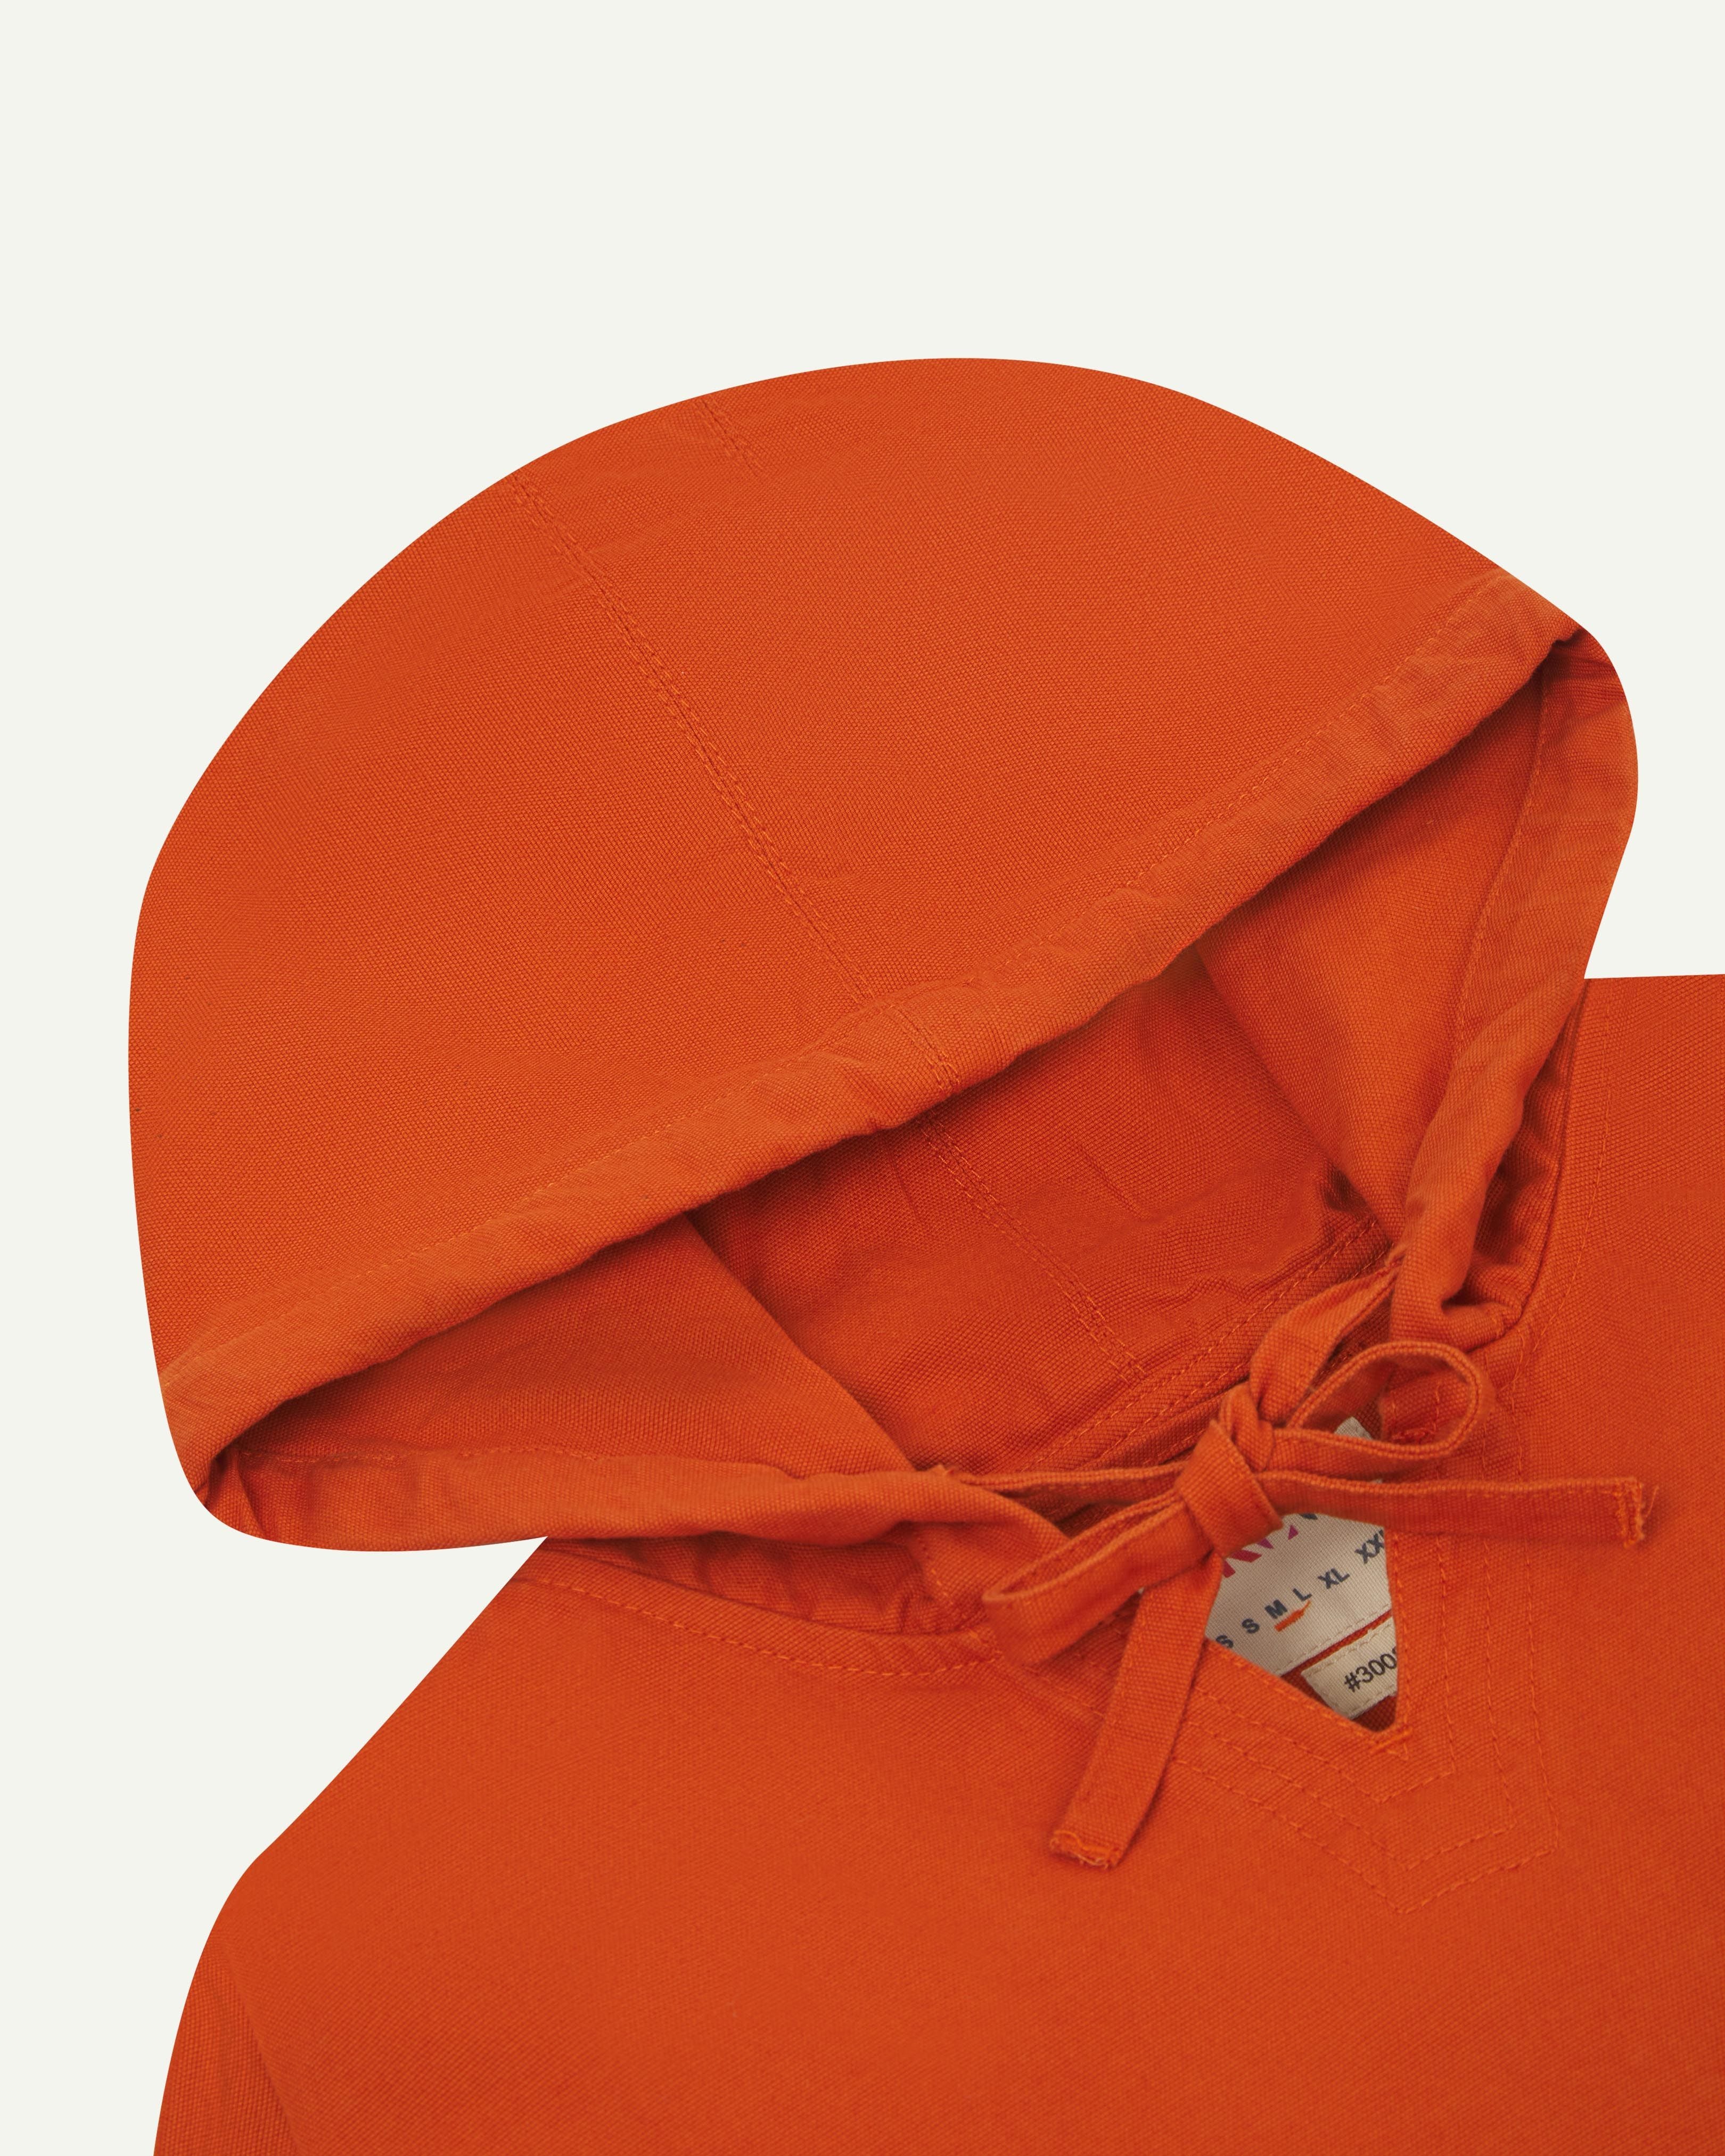 front close view of 'gold' coloured men's smock from Uskees showing the ties at the neck, hood and brand label.